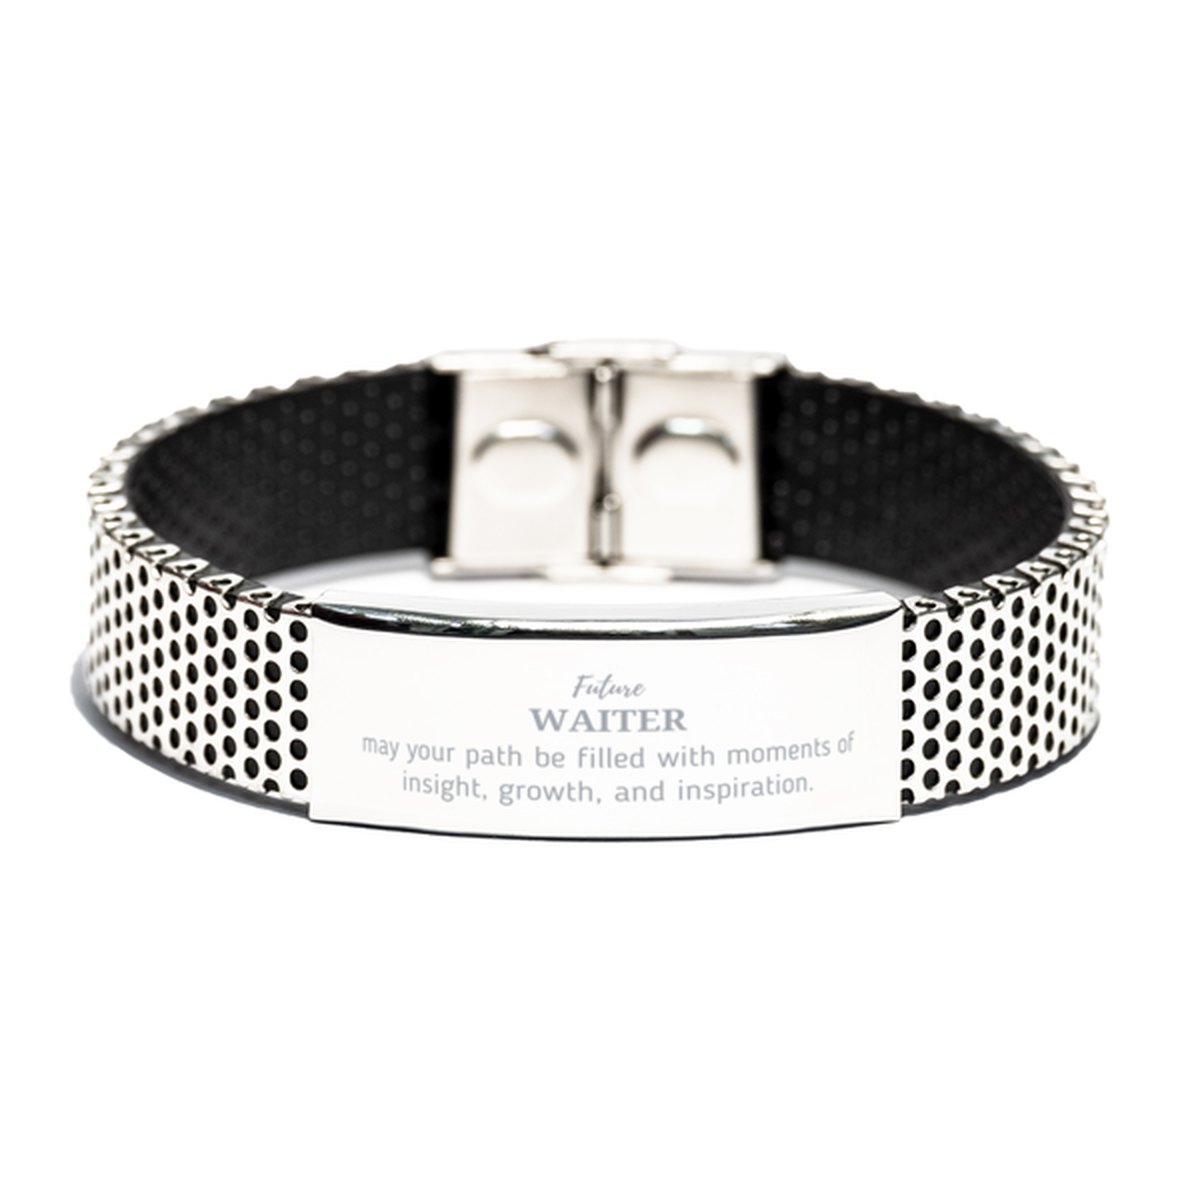 Future Waiter Gifts, May your path be filled with moments of insight, Graduation Gifts for New Waiter, Christmas Unique Stainless Steel Bracelet For Men, Women, Friends